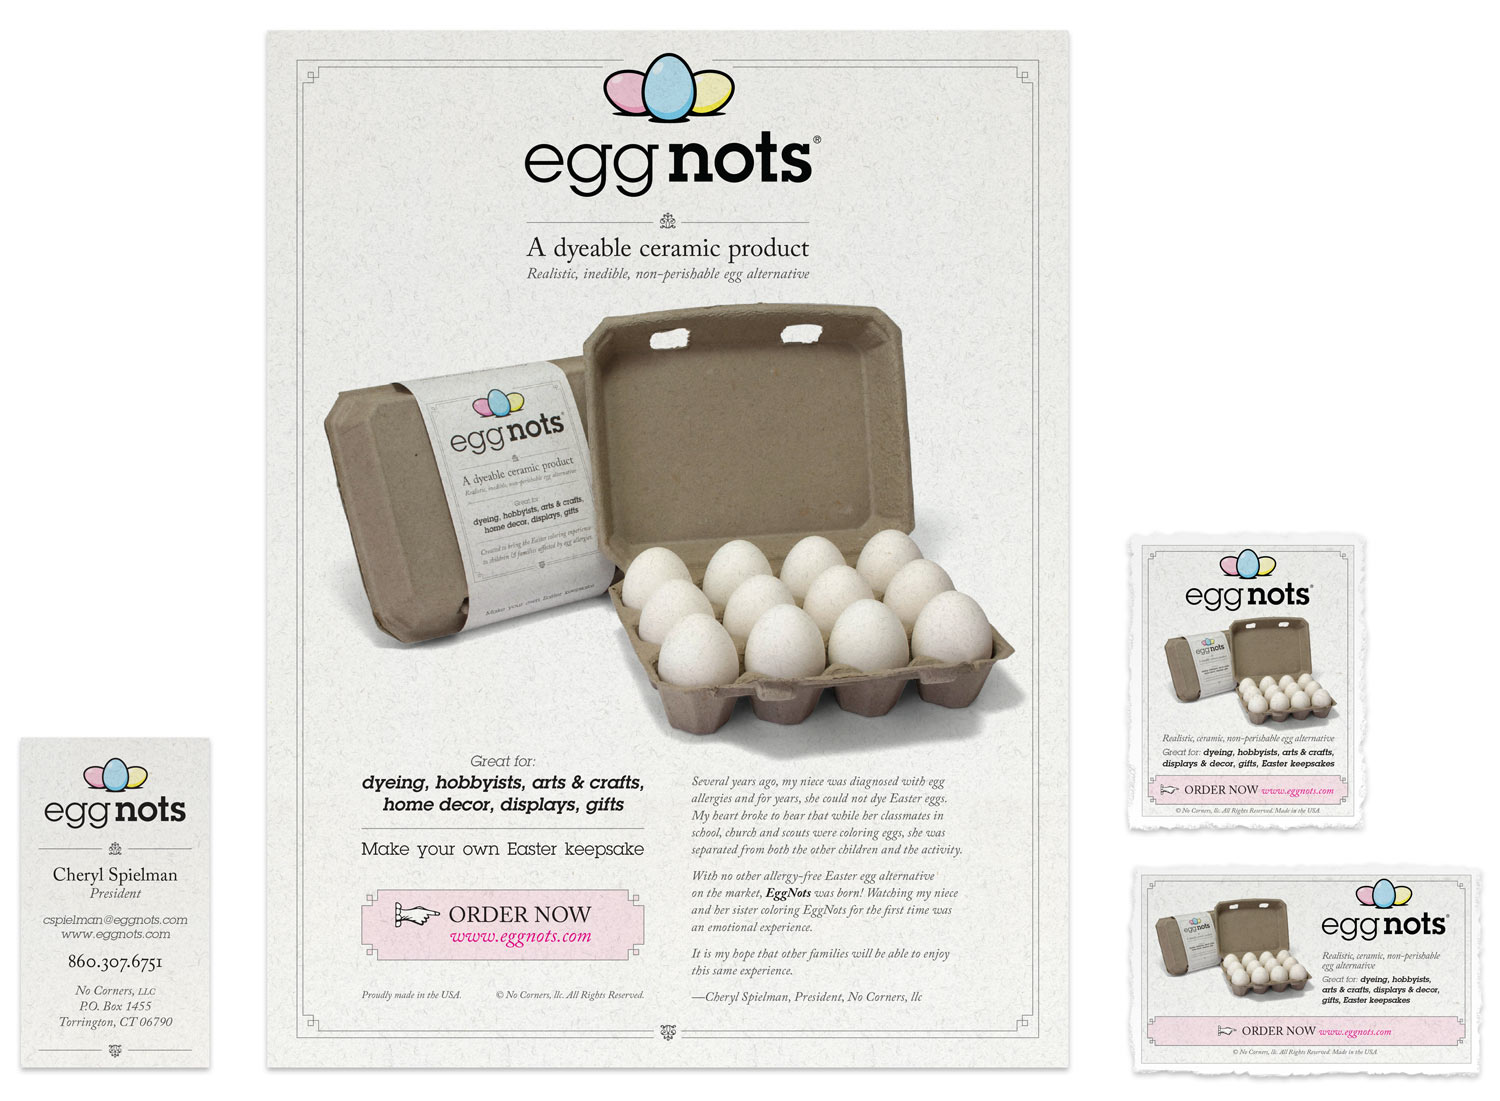 Print design for EggNots collateral